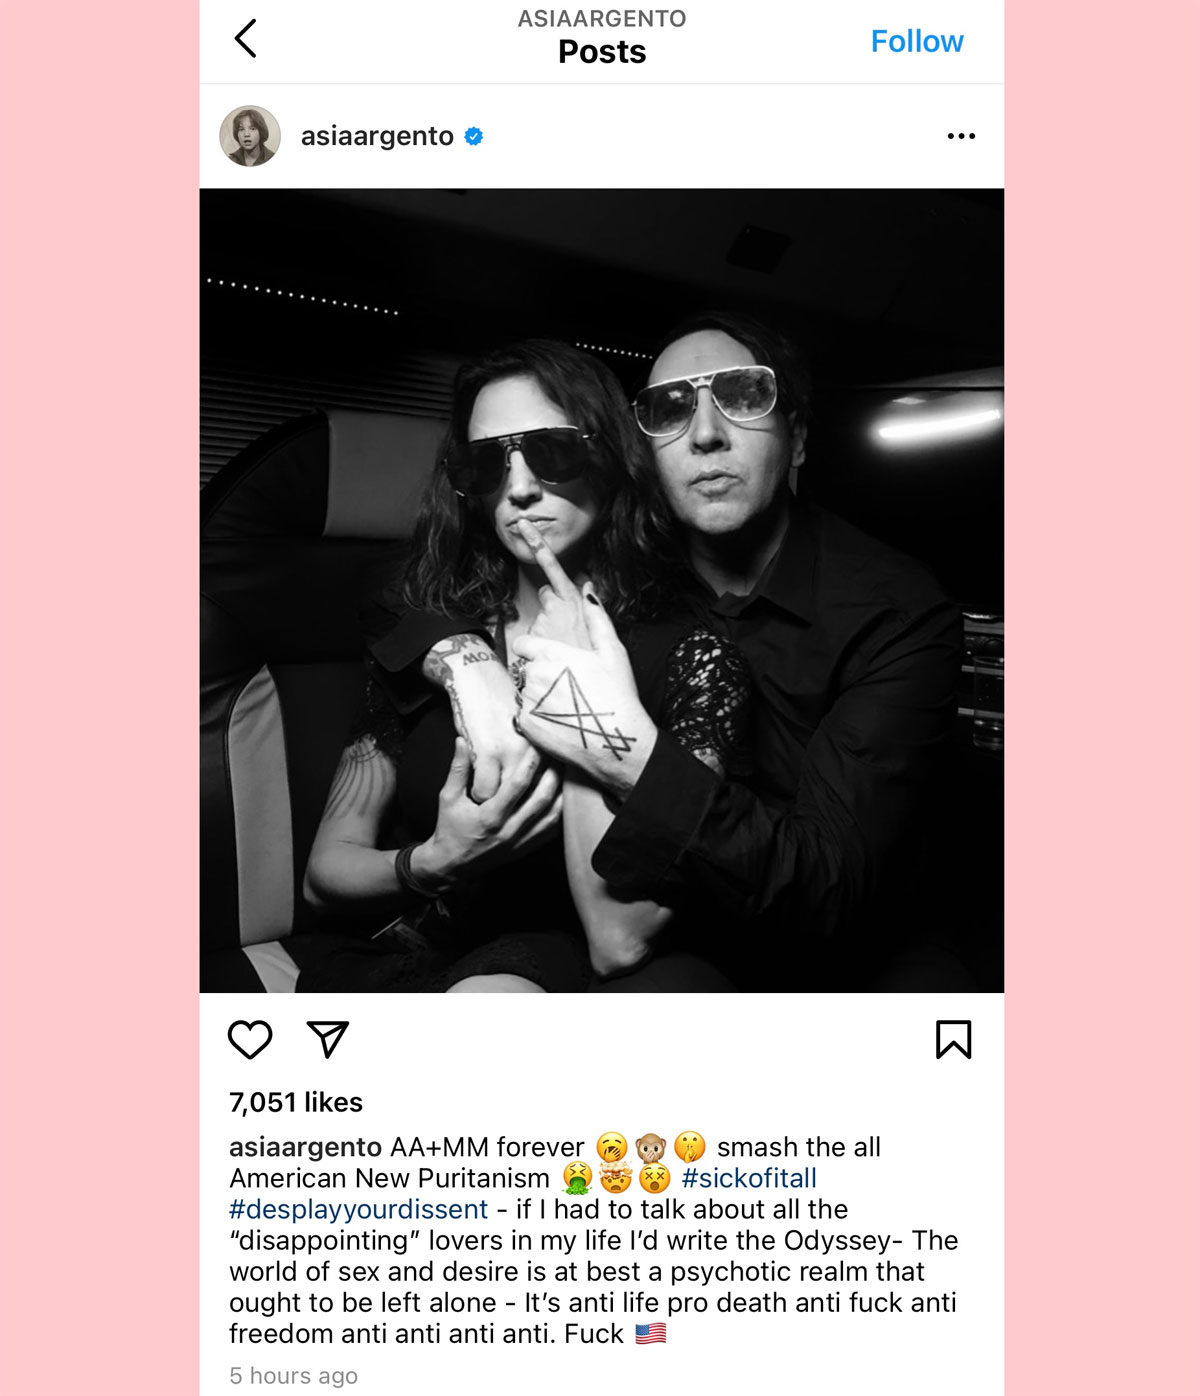 Asia Argento appears to defend Marilyn Manson in this since-deleted Instagram post.